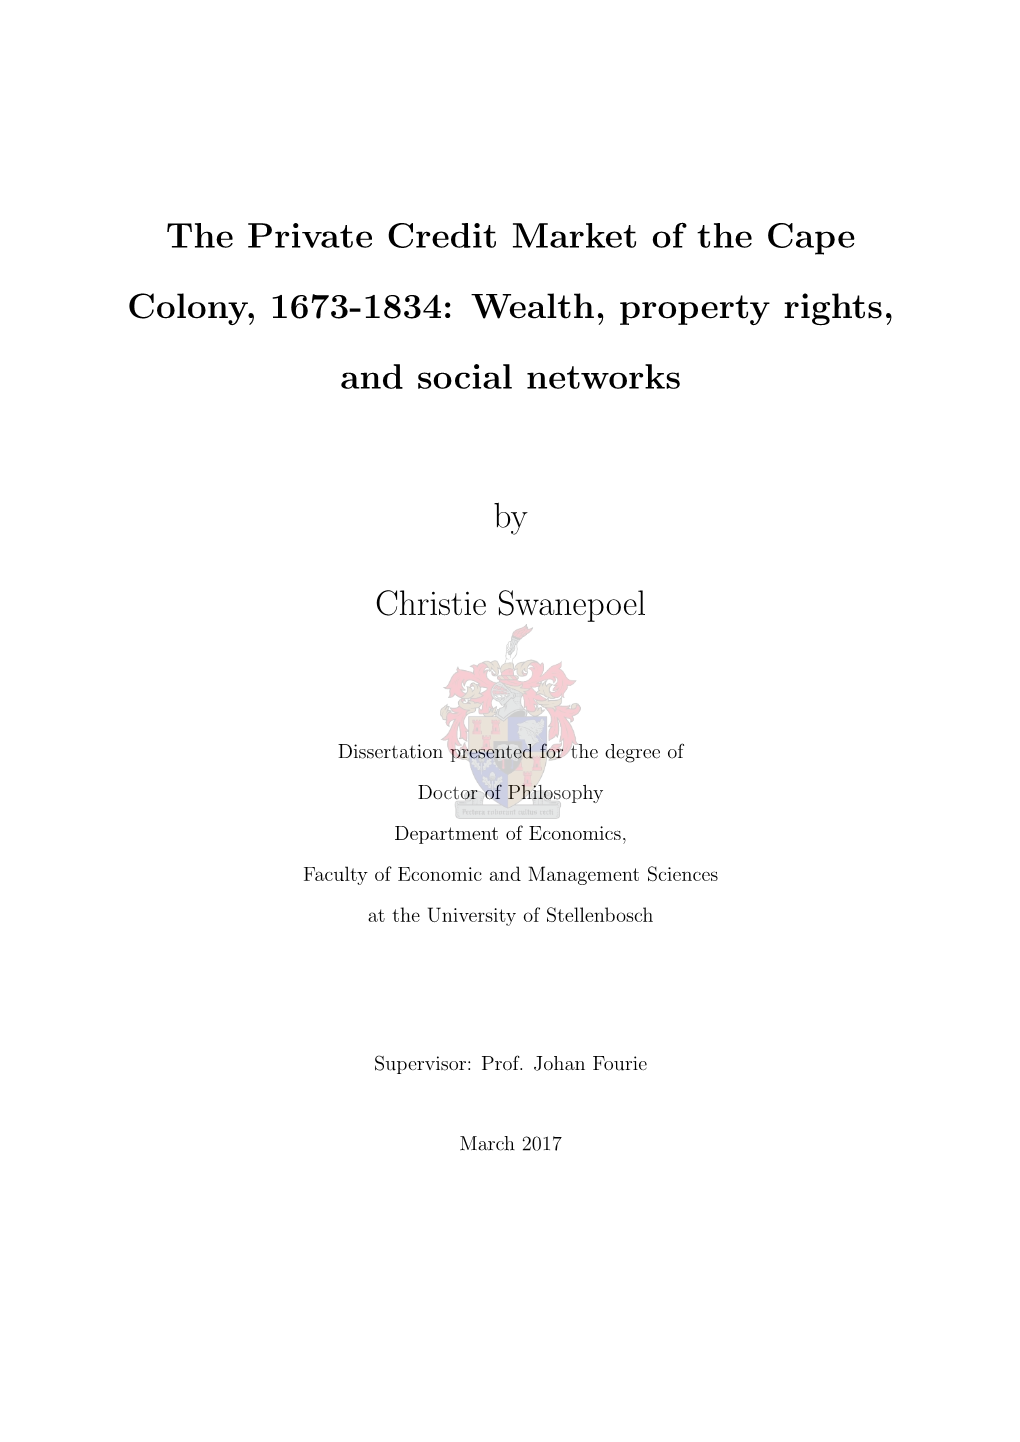 The Private Credit Market of the Cape Colony, 1673-1834: Wealth, Property Rights, and Social Networks